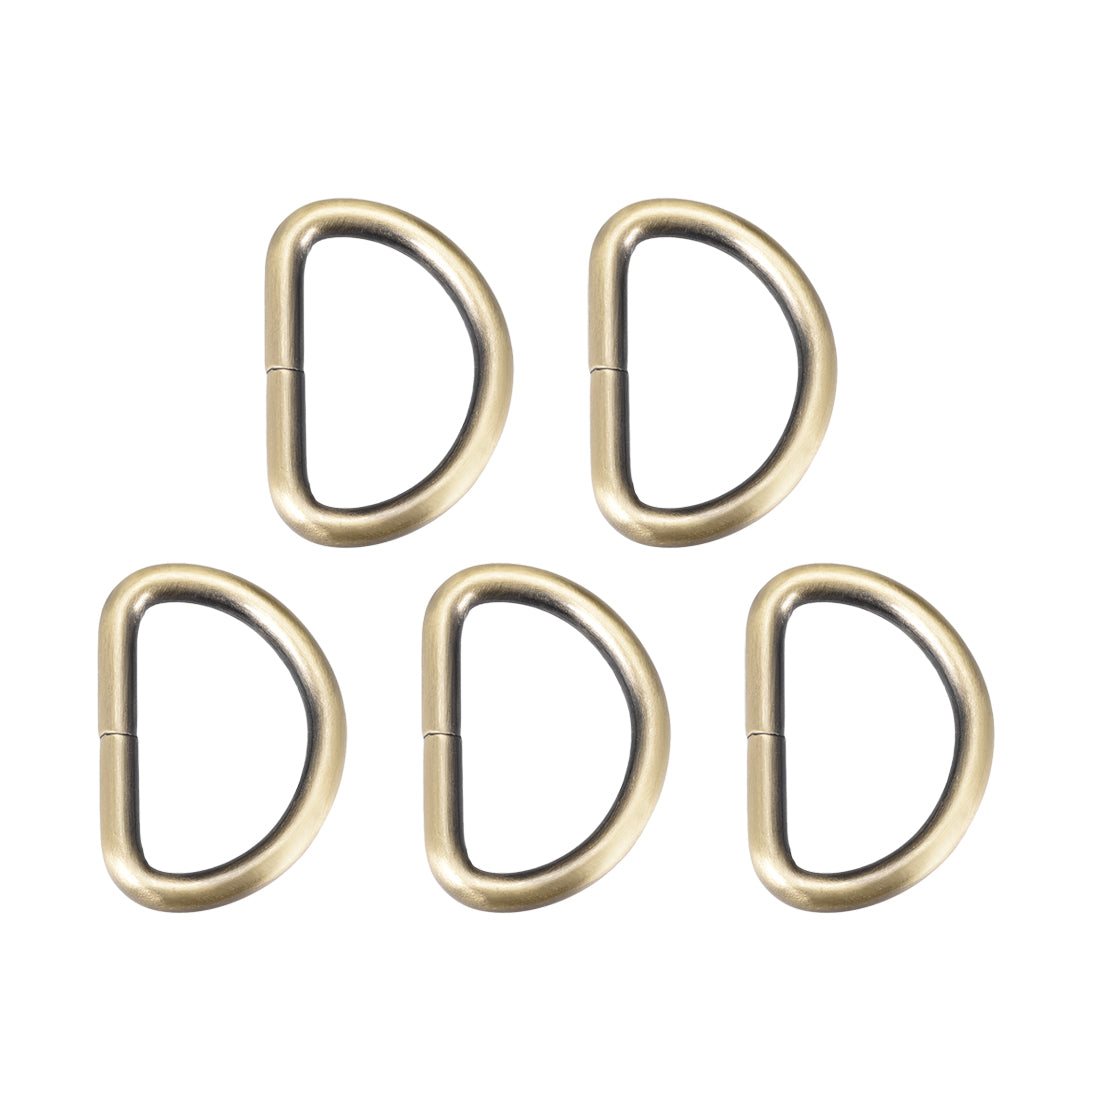 uxcell Uxcell 5 Pcs D Ring Buckle 1.26 Inch Metal Semi-Circular D-Rings Bronze Tone for Hardware Bags Belts Craft DIY Accessories